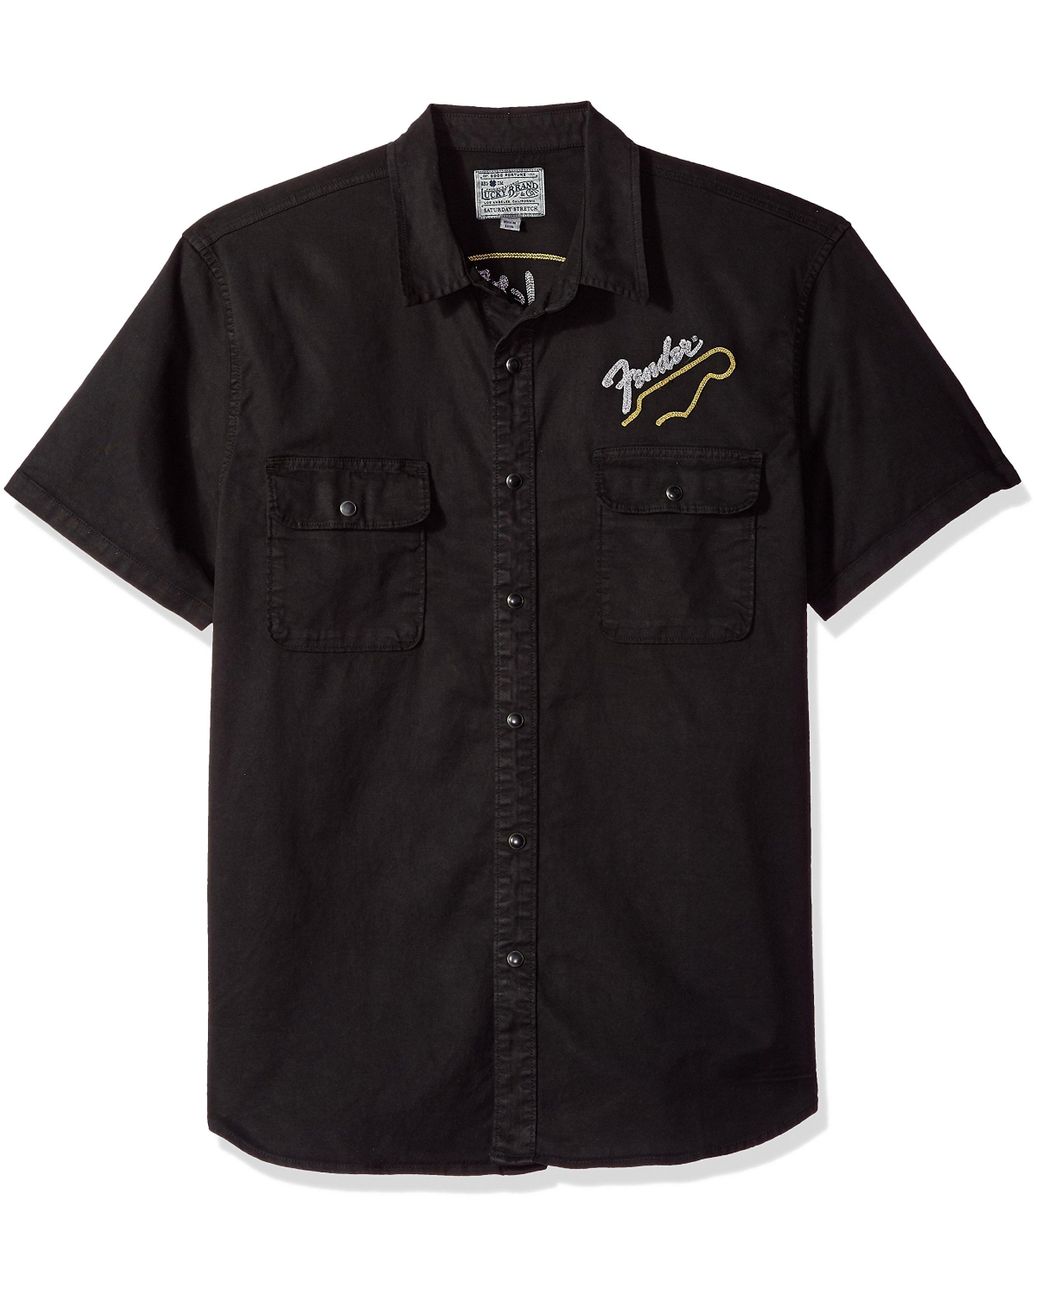 Lucky Brand Casual Short Sleeve Button Down Shirt With Fender Graphic ...